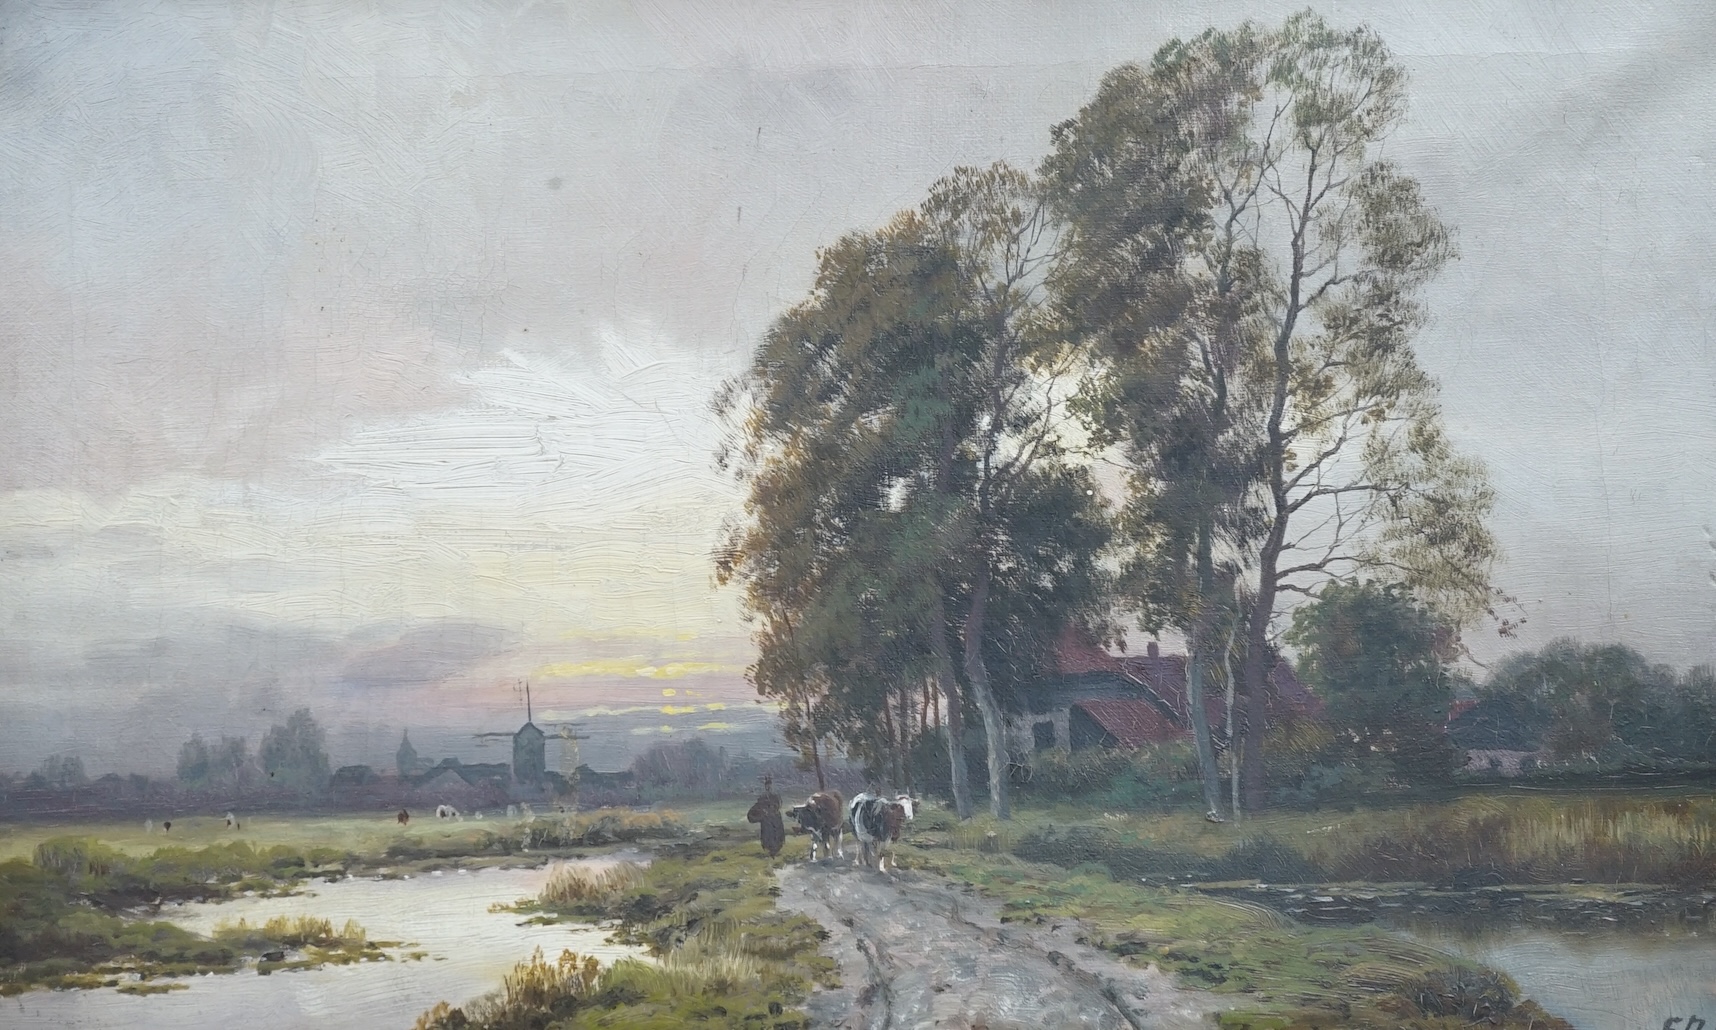 Ferdinand de Prins (Belgian, 1859-1908), oil on canvas, Wetlands with cattle, indistinctly signed lower right, A. Dechamps-Soiron label verso, 25 x 39cm. Condition - fair